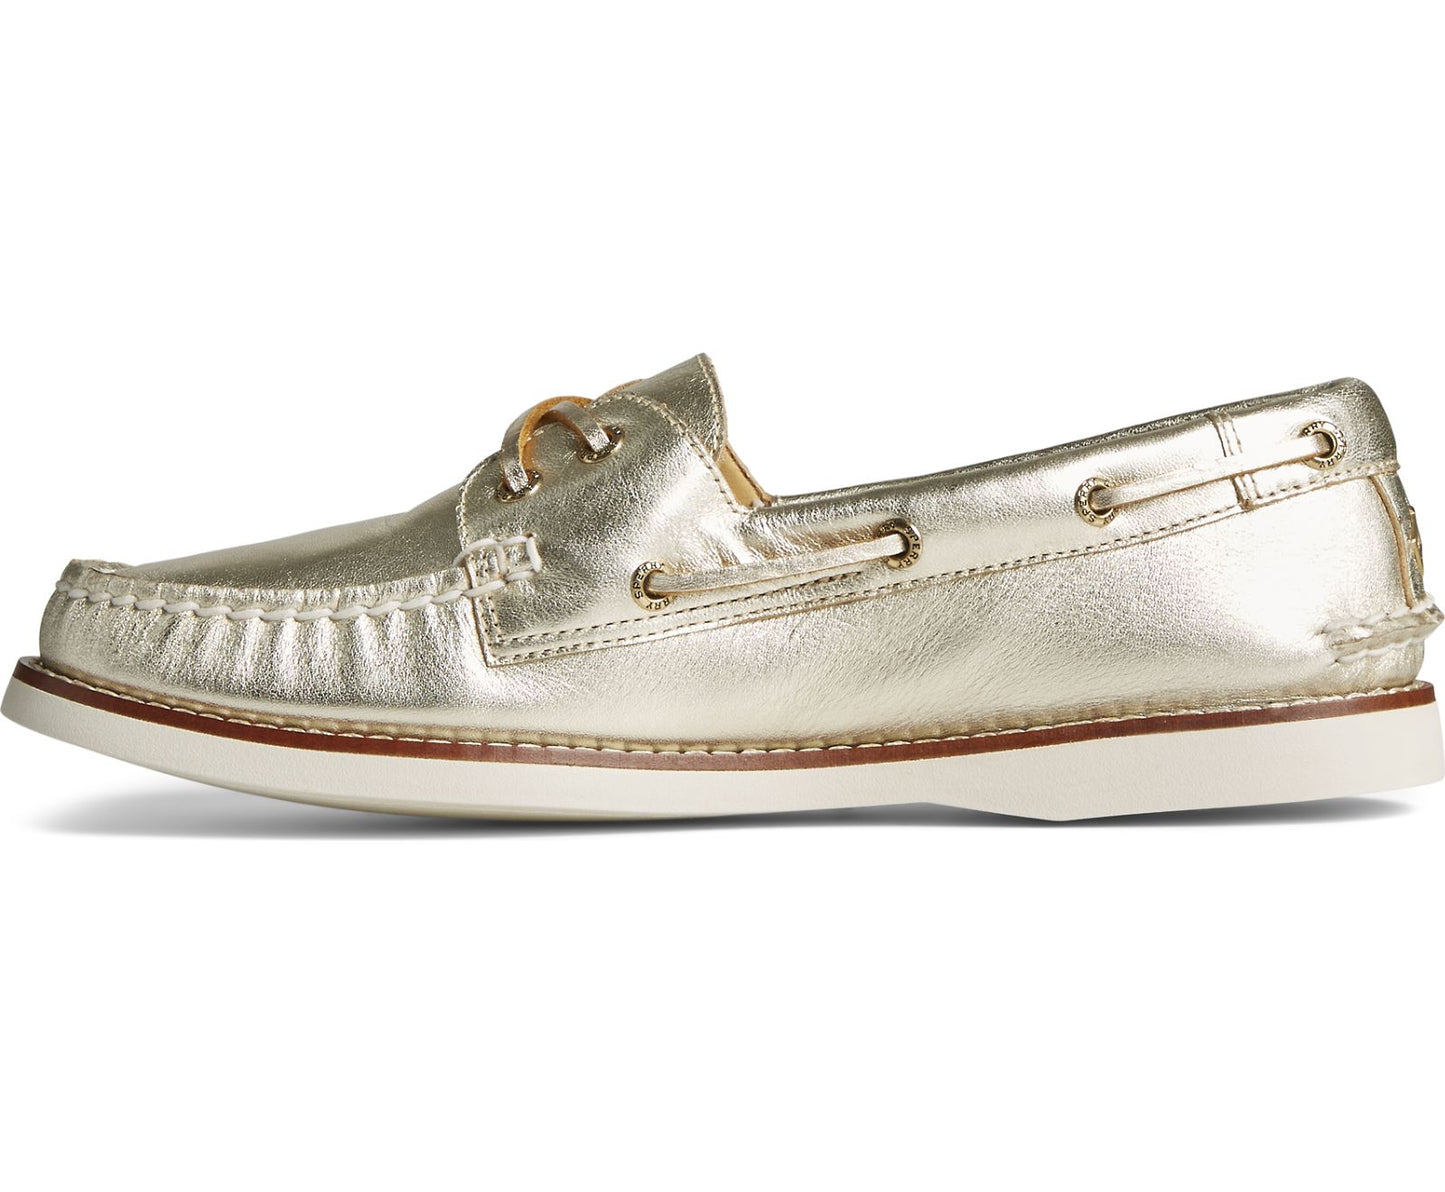 Women's Sperry Top-Sider Gold Cup Authentic/Original Montana 2-Eye Boat Shoe, STS87107 Sizes Gold